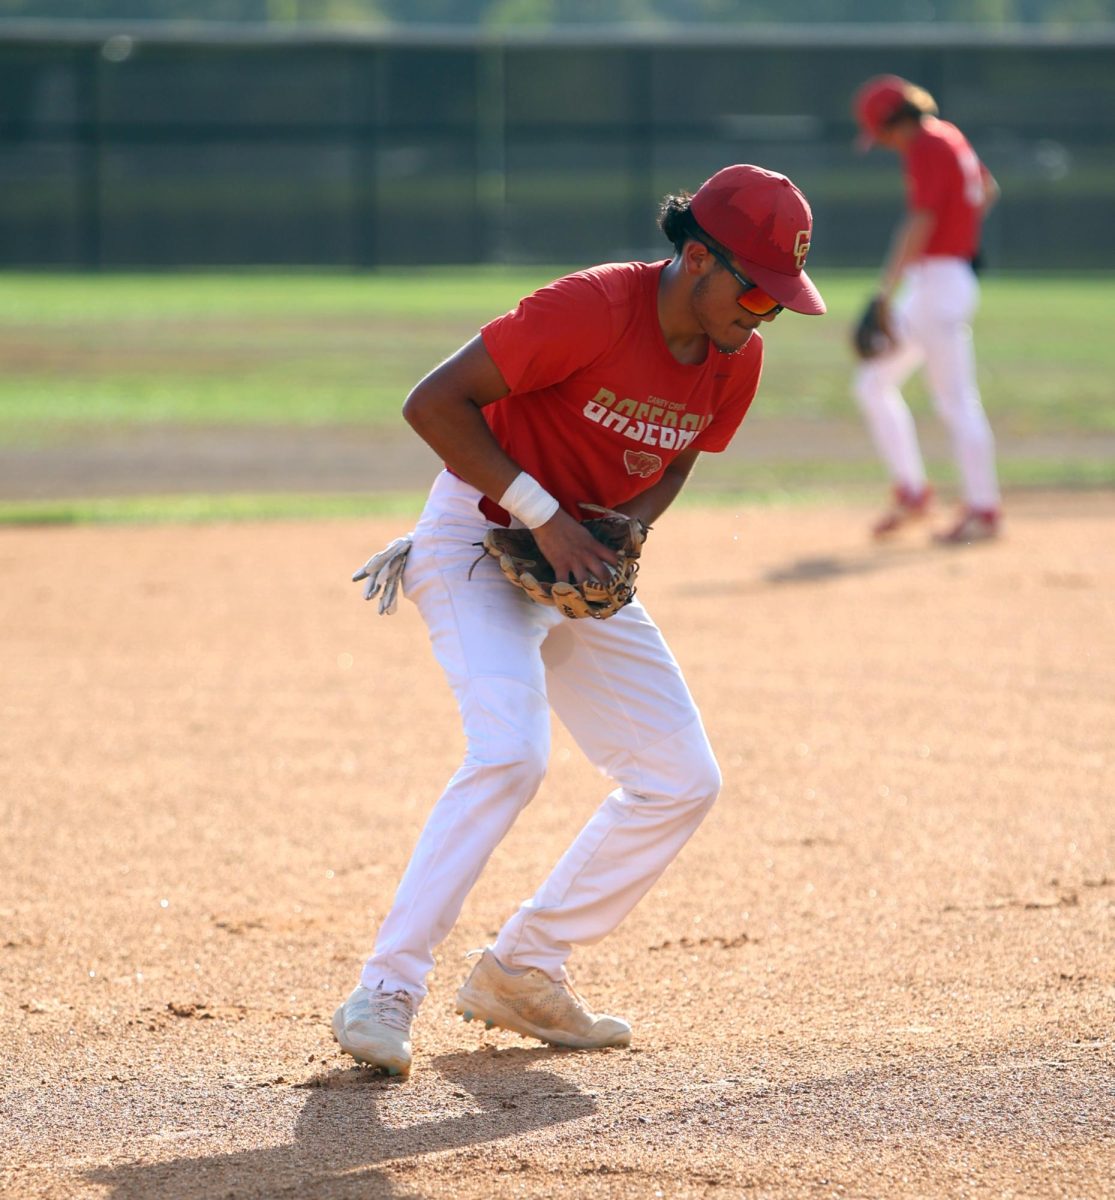 LOCK IN. Senior Aaron Molina picks up the ball and prepares to throw it to home base on Sept. 6, 2023 at Caney Creek High School. This was the first time Caney Creek has competed in Fall Ball. “I think I did good overall for not playing in a game for 4 months,” Molina said. “I was a little rusty but I just need to get into the feeling again and Ill be back to my best.”